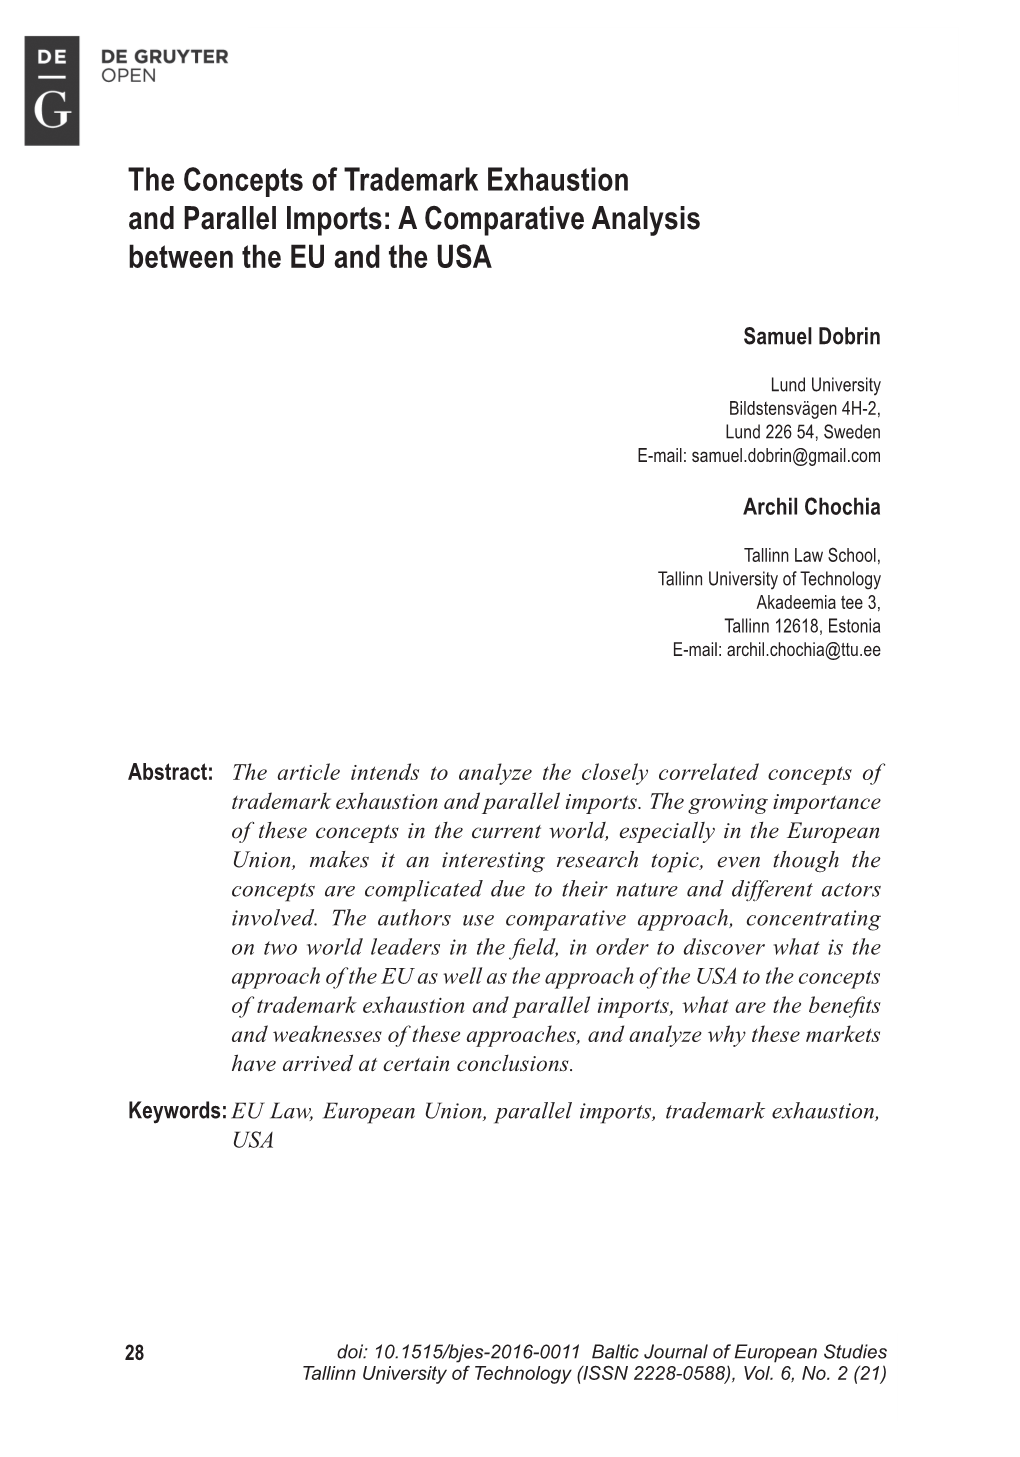 The Concepts of Trademark Exhaustion and Parallel Imports: a Comparative Analysis Between the EU and the USA